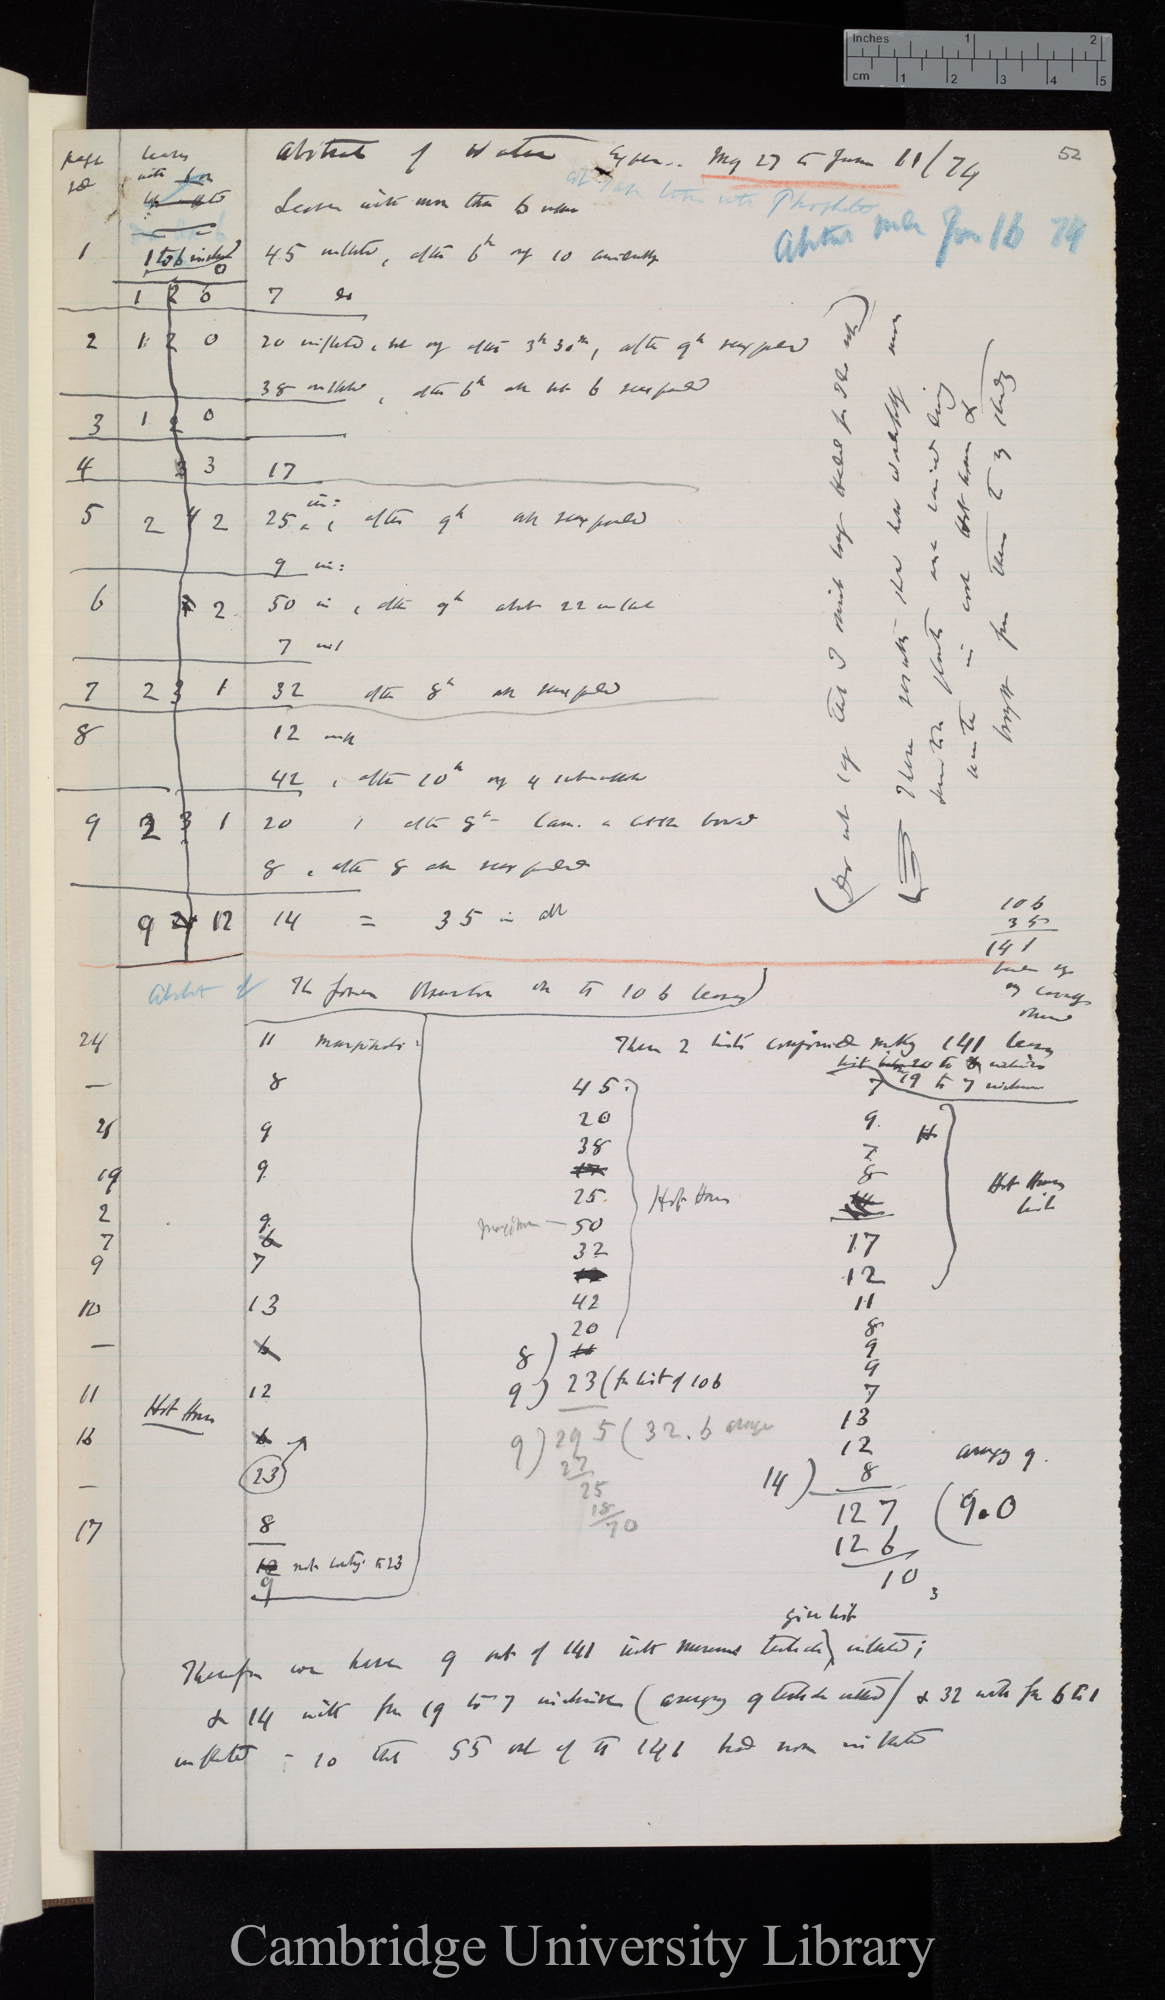 Abstract of water experiments / Abstract made [16 June 1874] [of notes numbered pp 1-9, 24, 21, 19, 2, 7, 9-11, 16-17]